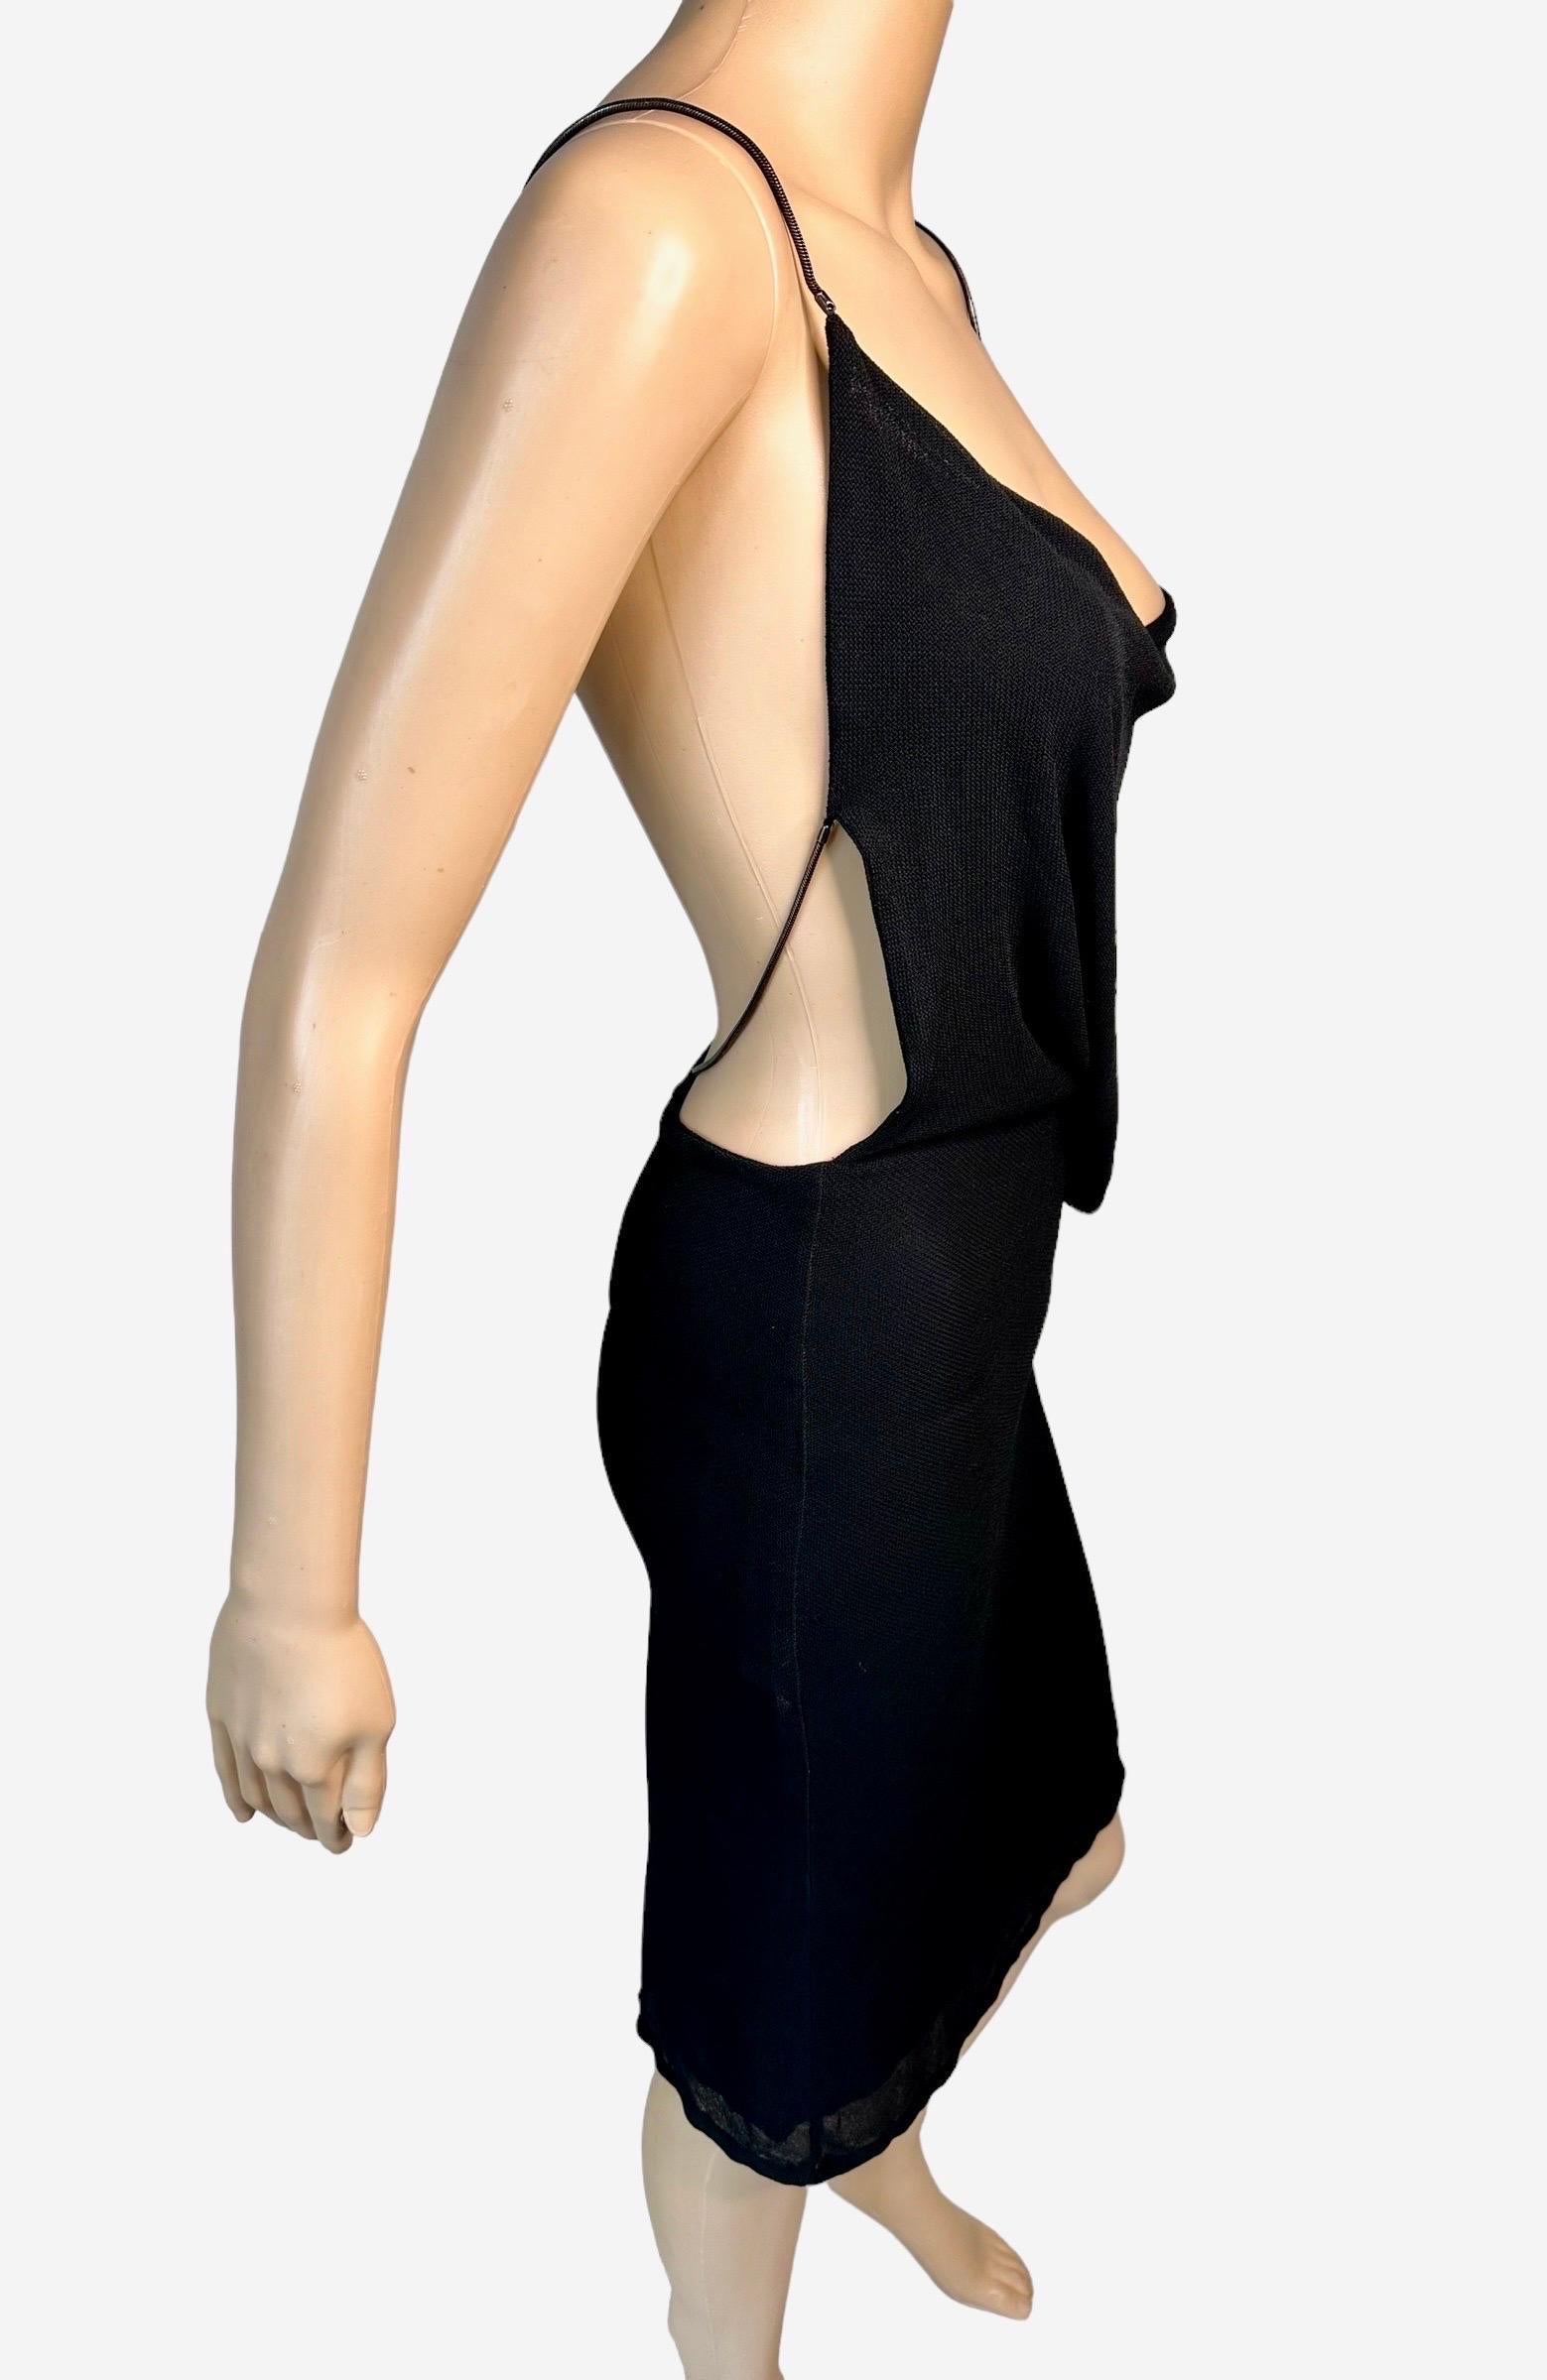 Tom Ford for Gucci S/S 1997 Runway Chain Cutout Backless Sheer Knit Black Dress In Good Condition For Sale In Naples, FL